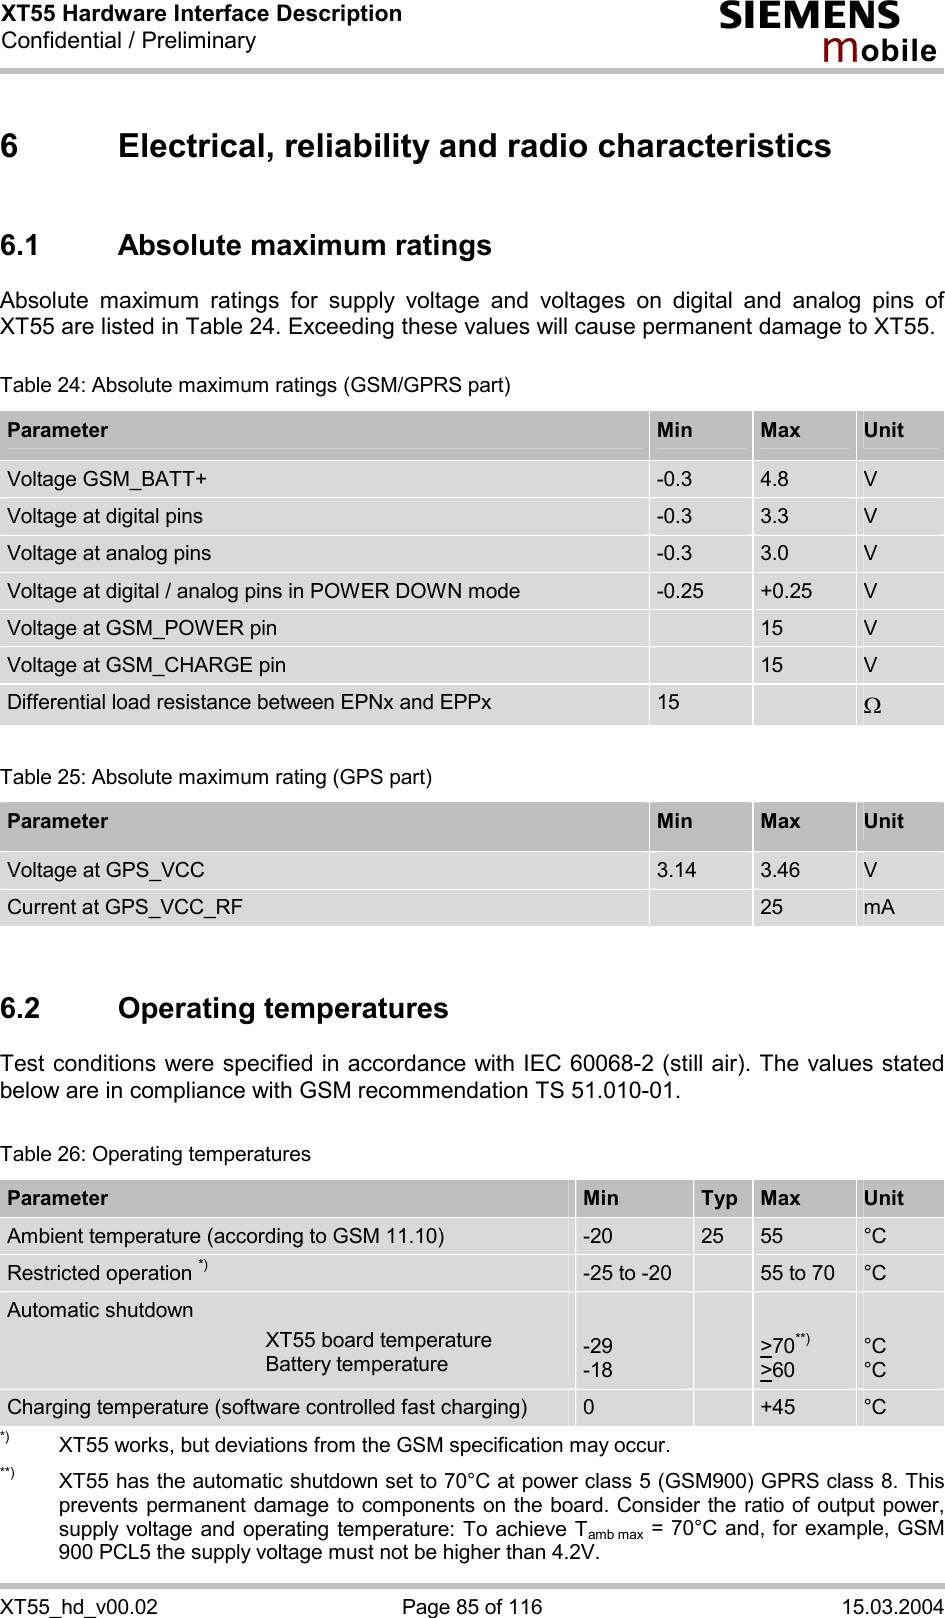 XT55 Hardware Interface Description Confidential / Preliminary s mo b i l e XT55_hd_v00.02  Page 85 of 116  15.03.2004 6  Electrical, reliability and radio characteristics 6.1  Absolute maximum ratings Absolute maximum ratings for supply voltage and voltages on digital and analog pins of XT55 are listed in Table 24. Exceeding these values will cause permanent damage to XT55.  Table 24: Absolute maximum ratings (GSM/GPRS part) Parameter  Min  Max  Unit Voltage GSM_BATT+  -0.3  4.8  V Voltage at digital pins   -0.3  3.3  V Voltage at analog pins   -0.3  3.0  V Voltage at digital / analog pins in POWER DOWN mode  -0.25  +0.25  V Voltage at GSM_POWER pin   15  V Voltage at GSM_CHARGE pin   15  V Differential load resistance between EPNx and EPPx  15   W  Table 25: Absolute maximum rating (GPS part) Parameter  Min  Max  Unit Voltage at GPS_VCC  3.14  3.46  V Current at GPS_VCC_RF   25  mA  6.2 Operating temperatures Test conditions were specified in accordance with IEC 60068-2 (still air). The values stated below are in compliance with GSM recommendation TS 51.010-01.  Table 26: Operating temperatures Parameter  Min  Typ  Max  Unit Ambient temperature (according to GSM 11.10)  -20  25  55  °C Restricted operation *) -25 to -20   55 to 70  °C Automatic shutdown   XT55 board temperature   Battery temperature  -29 -18    &gt;70**) &gt;60  °C °C Charging temperature (software controlled fast charging)  0   +45  °C *)  XT55 works, but deviations from the GSM specification may occur. **)   XT55 has the automatic shutdown set to 70°C at power class 5 (GSM900) GPRS class 8. This prevents permanent damage to components on the board. Consider the ratio of output power, supply voltage and operating temperature: To achieve Tamb max = 70°C and, for example, GSM 900 PCL5 the supply voltage must not be higher than 4.2V.  